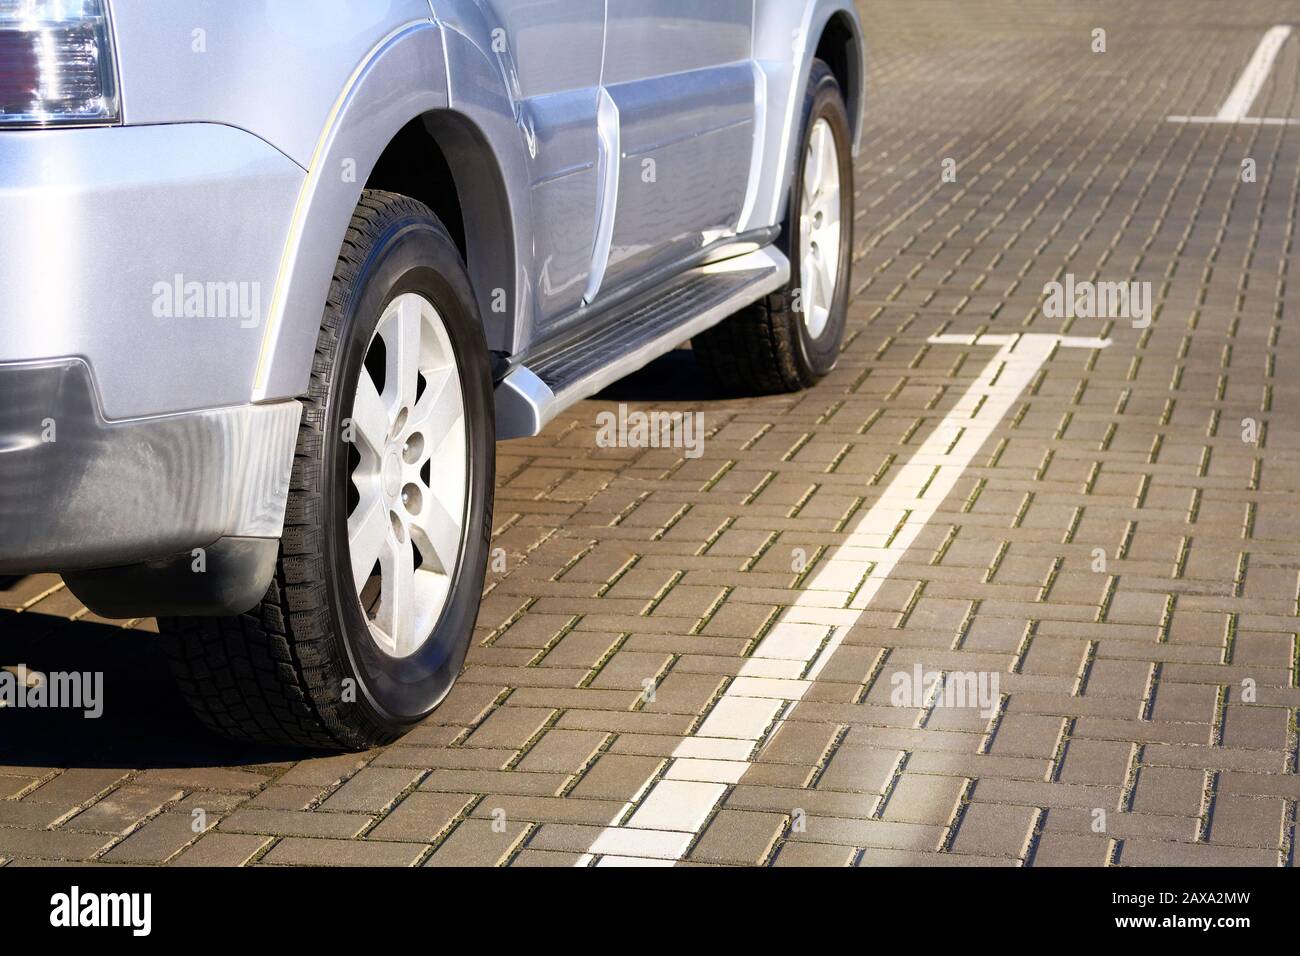 Silver car is parked in its parking spot in city. Close up car wheel, urban environment. Stock Photo